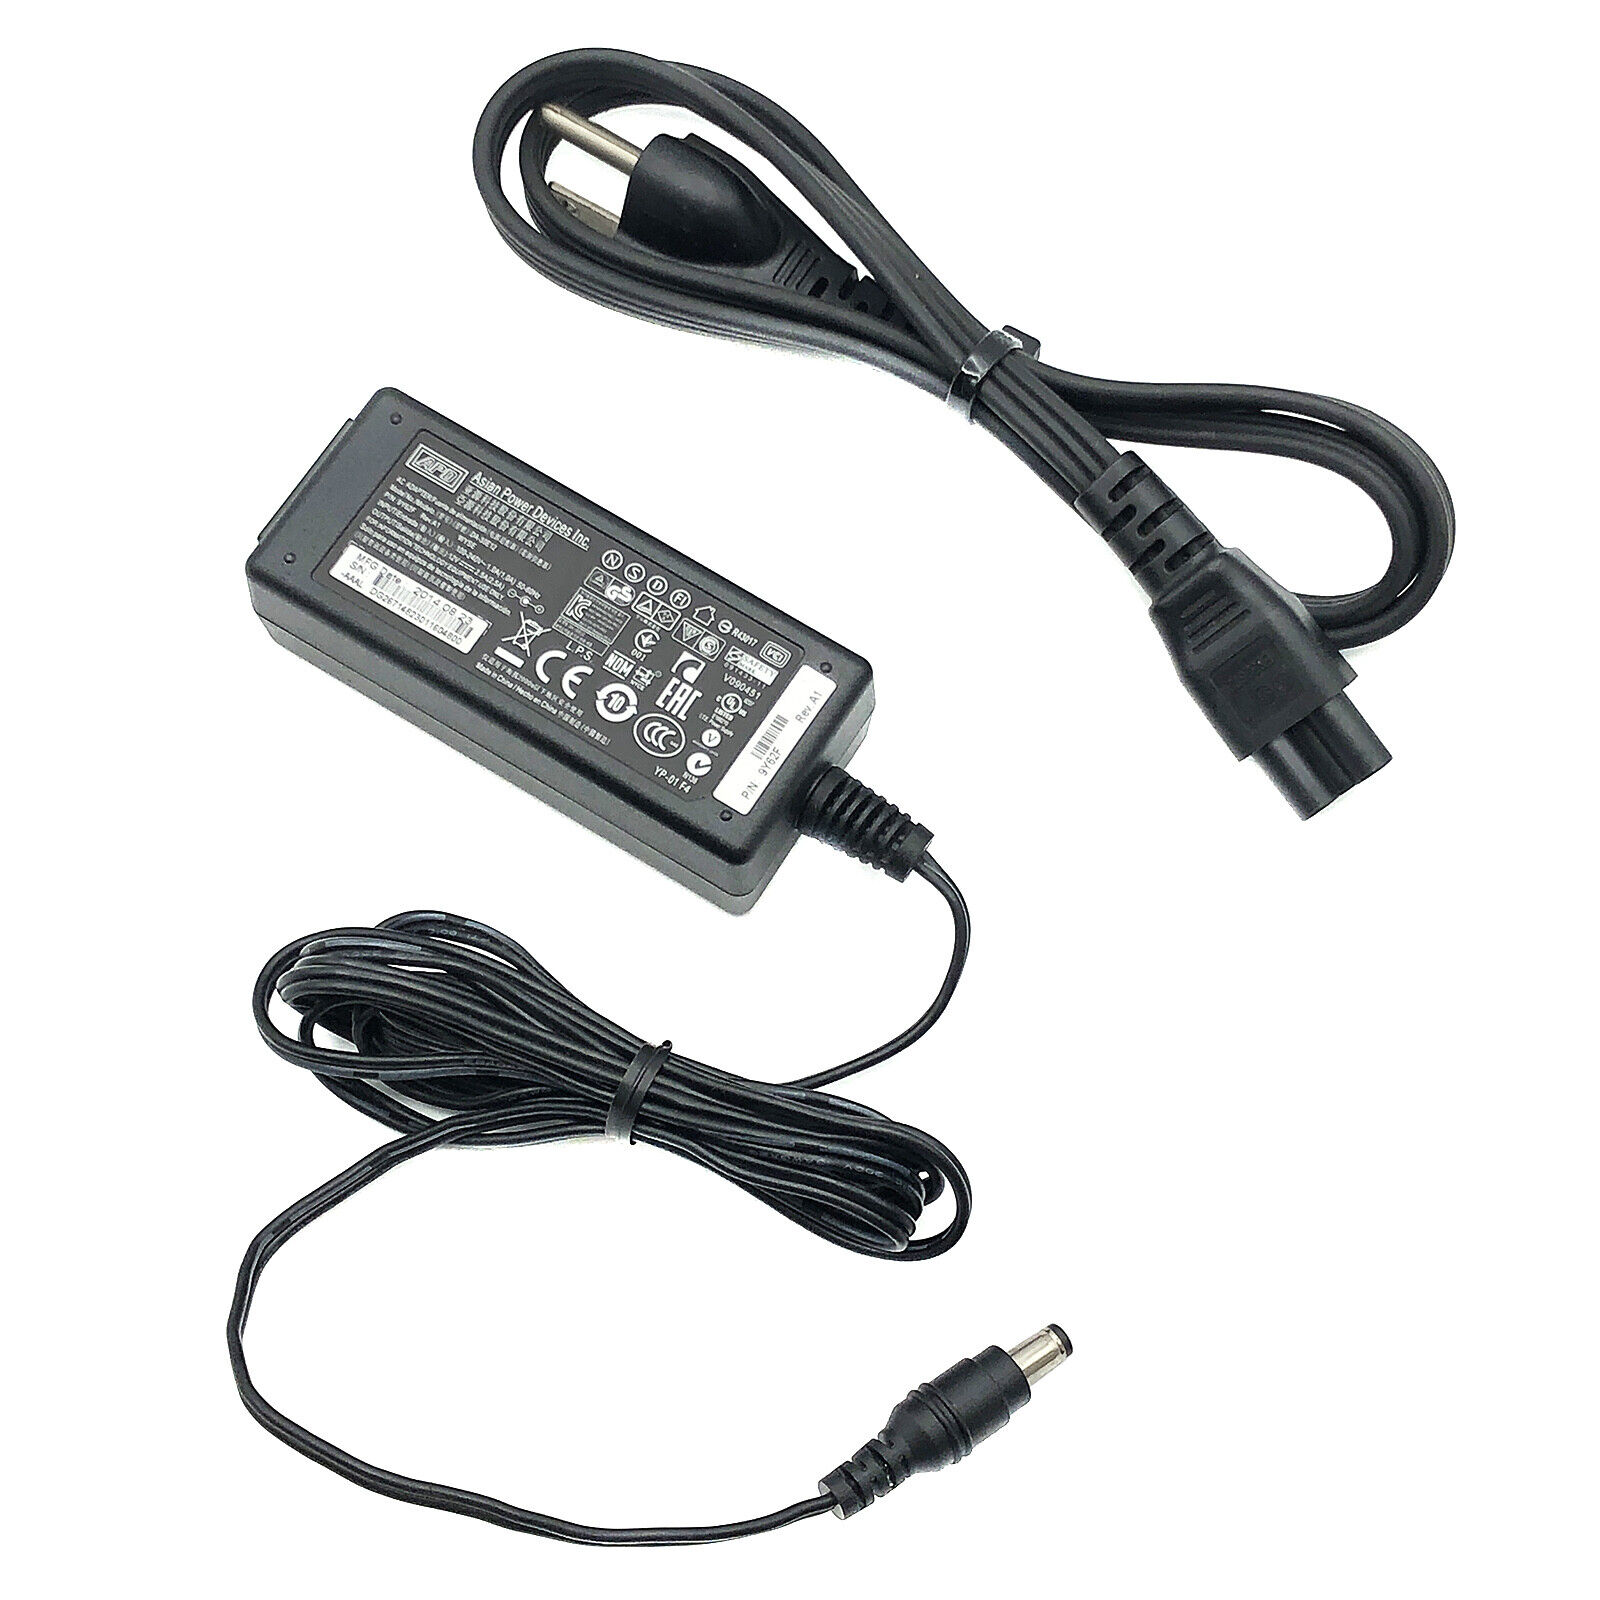 NEW Original APD AC Adapter For HP ScanJet G2410 G2710 G3010 Scanner Charger